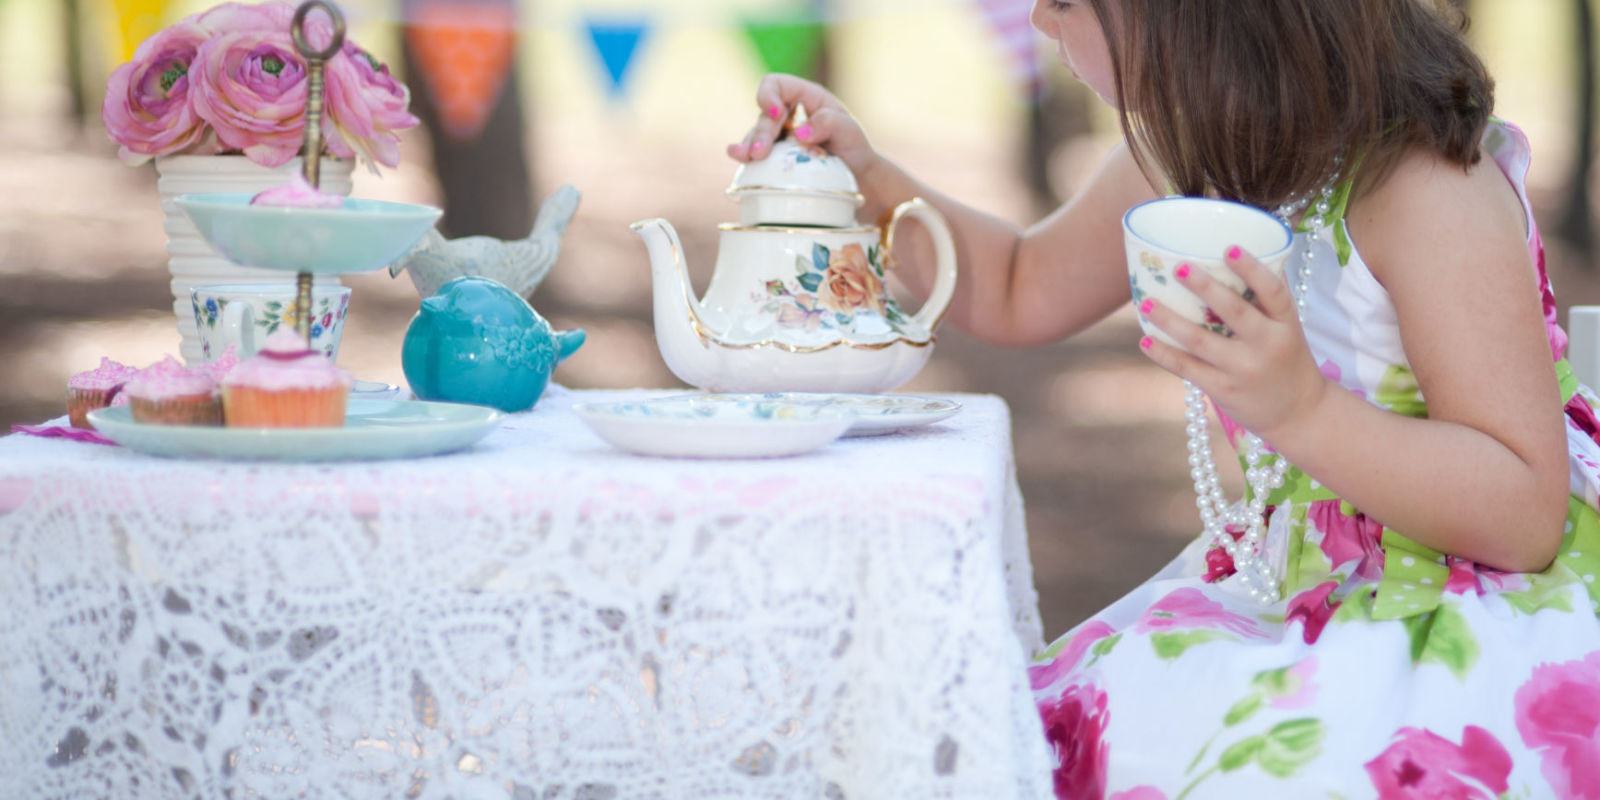 Tea Party Ideas For Toddlers
 How to Throw a Princess Tea Party Themed Kids Birthday